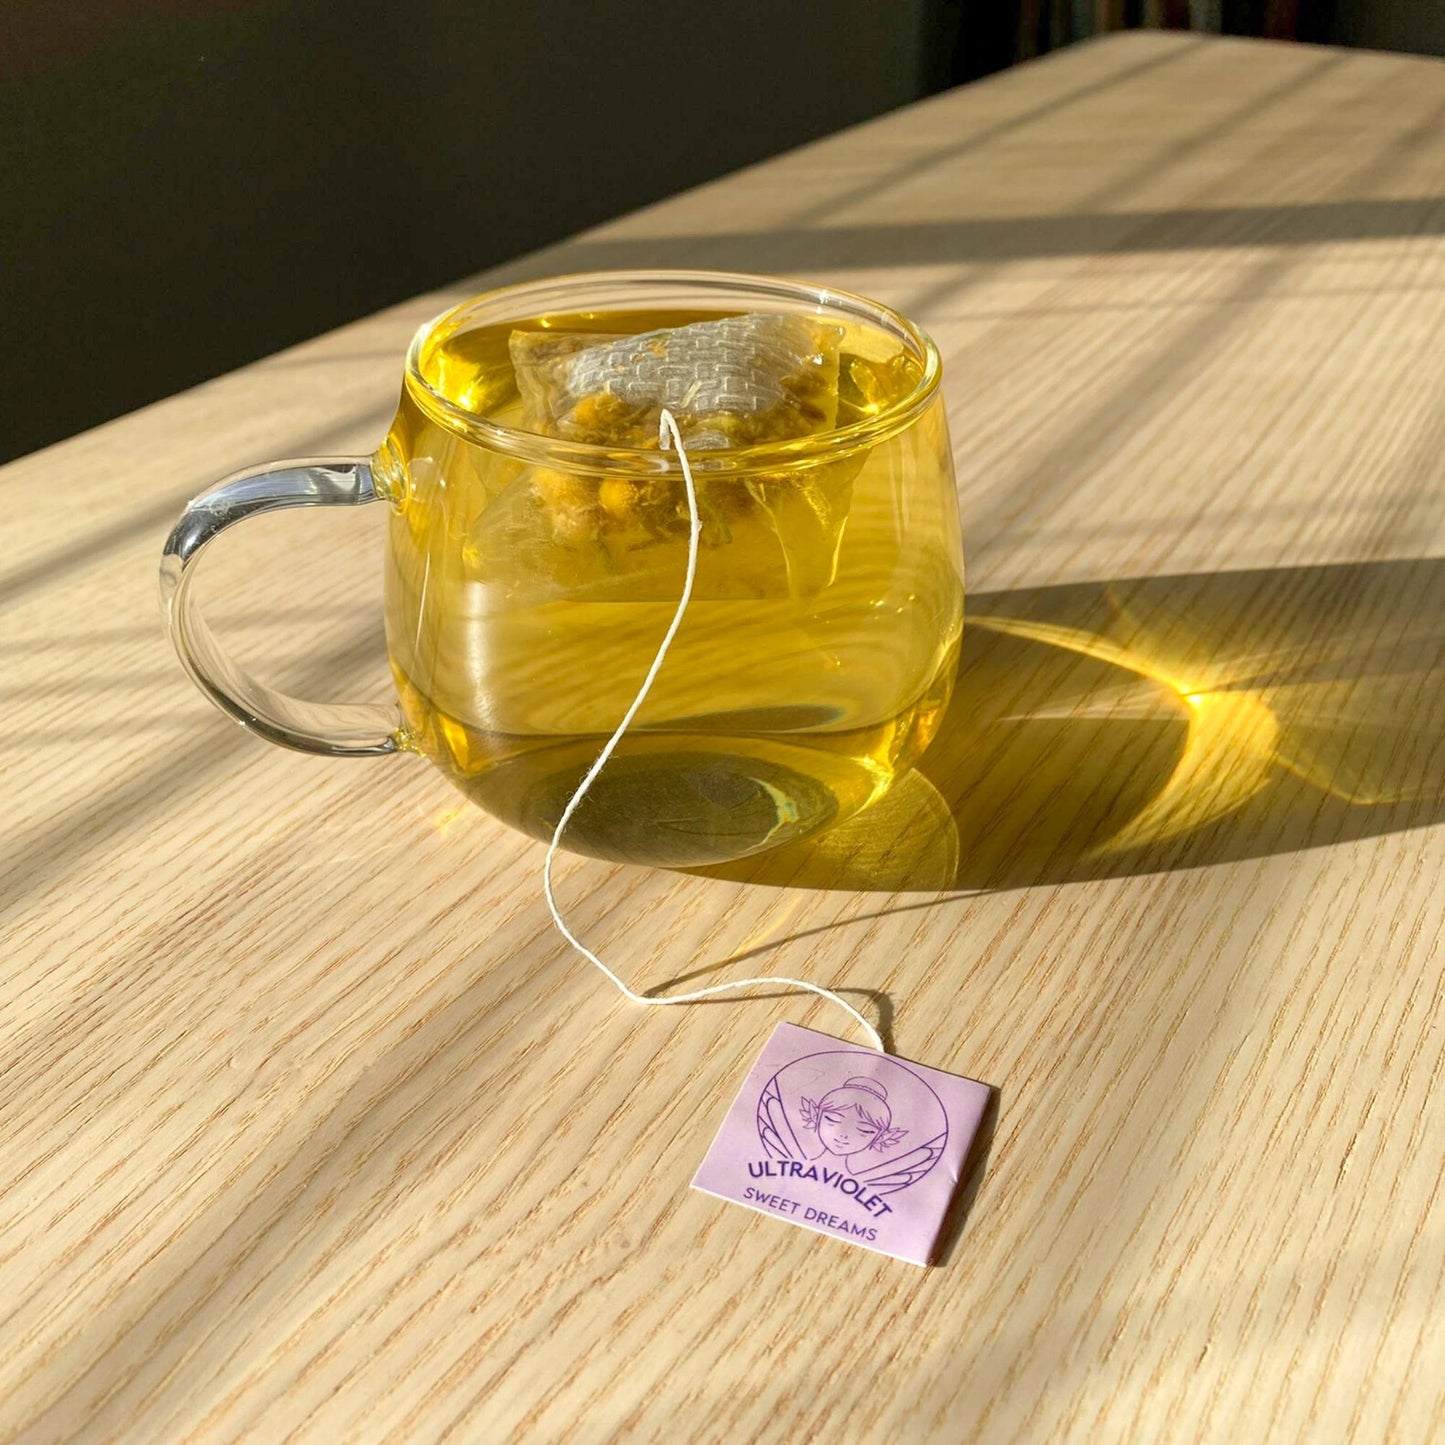 CLOSEOUT Blissful Dreams Tea - 6 Pack (Prior Batch)